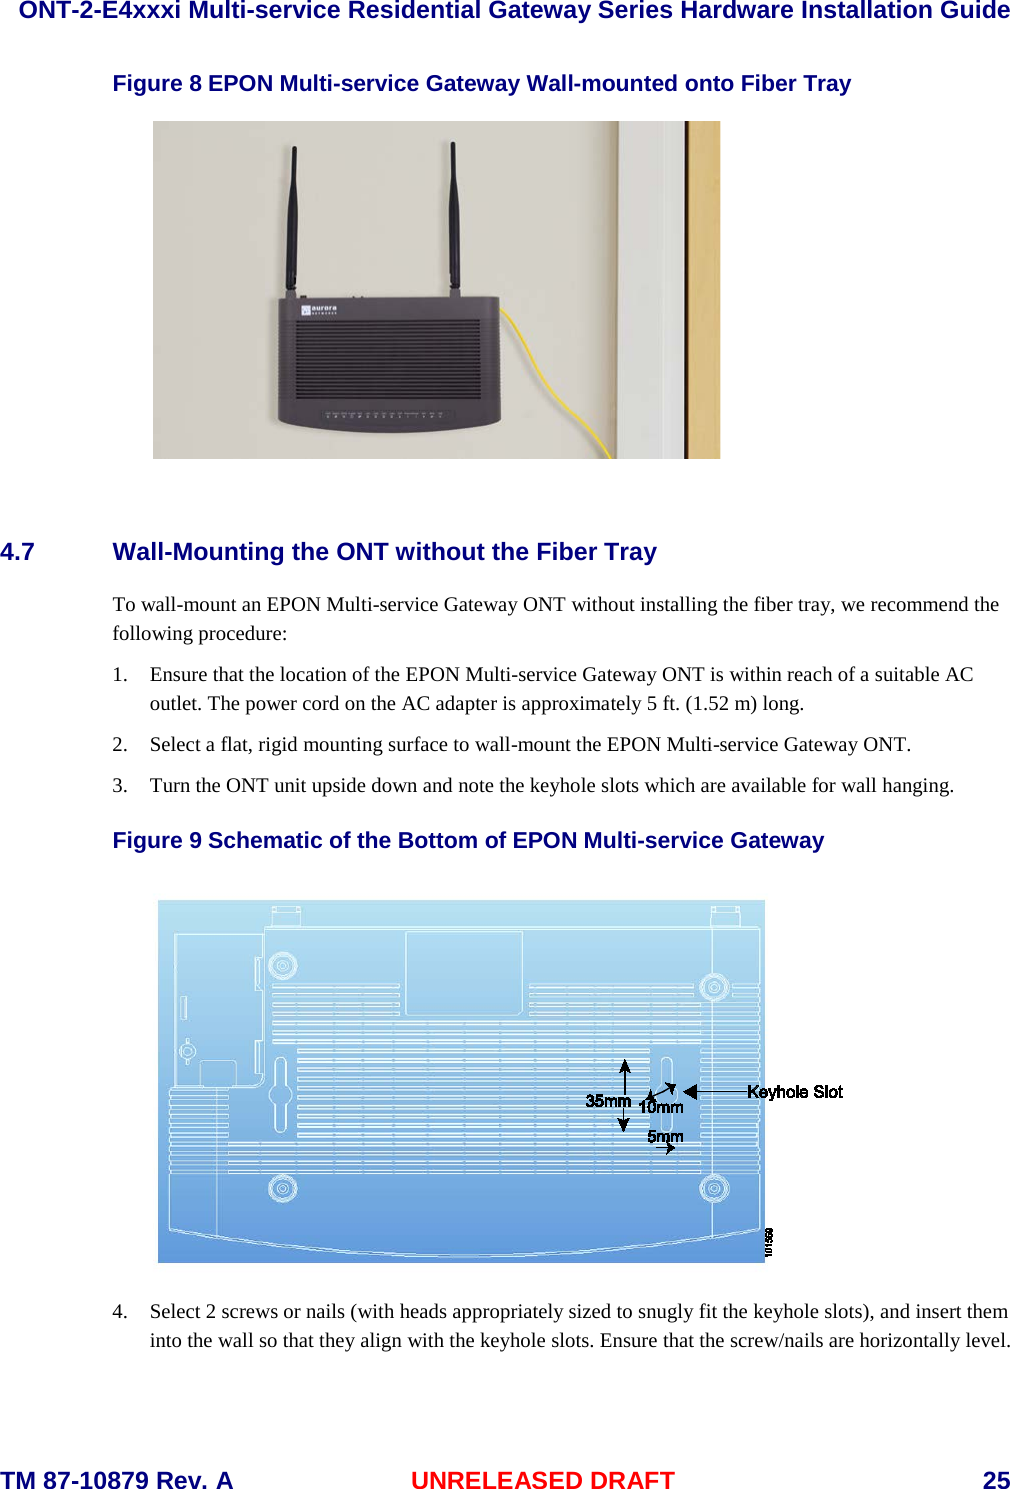  ONT-2-E4xxxi Multi-service Residential Gateway Series Hardware Installation Guide  TM 87-10879 Rev. A UNRELEASED DRAFT    25 Figure 8 EPON Multi-service Gateway Wall-mounted onto Fiber Tray   4.7 Wall-Mounting the ONT without the Fiber Tray To wall-mount an EPON Multi-service Gateway ONT without installing the fiber tray, we recommend the following procedure:    1. Ensure that the location of the EPON Multi-service Gateway ONT is within reach of a suitable AC outlet. The power cord on the AC adapter is approximately 5 ft. (1.52 m) long. 2. Select a flat, rigid mounting surface to wall-mount the EPON Multi-service Gateway ONT. 3. Turn the ONT unit upside down and note the keyhole slots which are available for wall hanging. Figure 9 Schematic of the Bottom of EPON Multi-service Gateway  4. Select 2 screws or nails (with heads appropriately sized to snugly fit the keyhole slots), and insert them into the wall so that they align with the keyhole slots. Ensure that the screw/nails are horizontally level.   